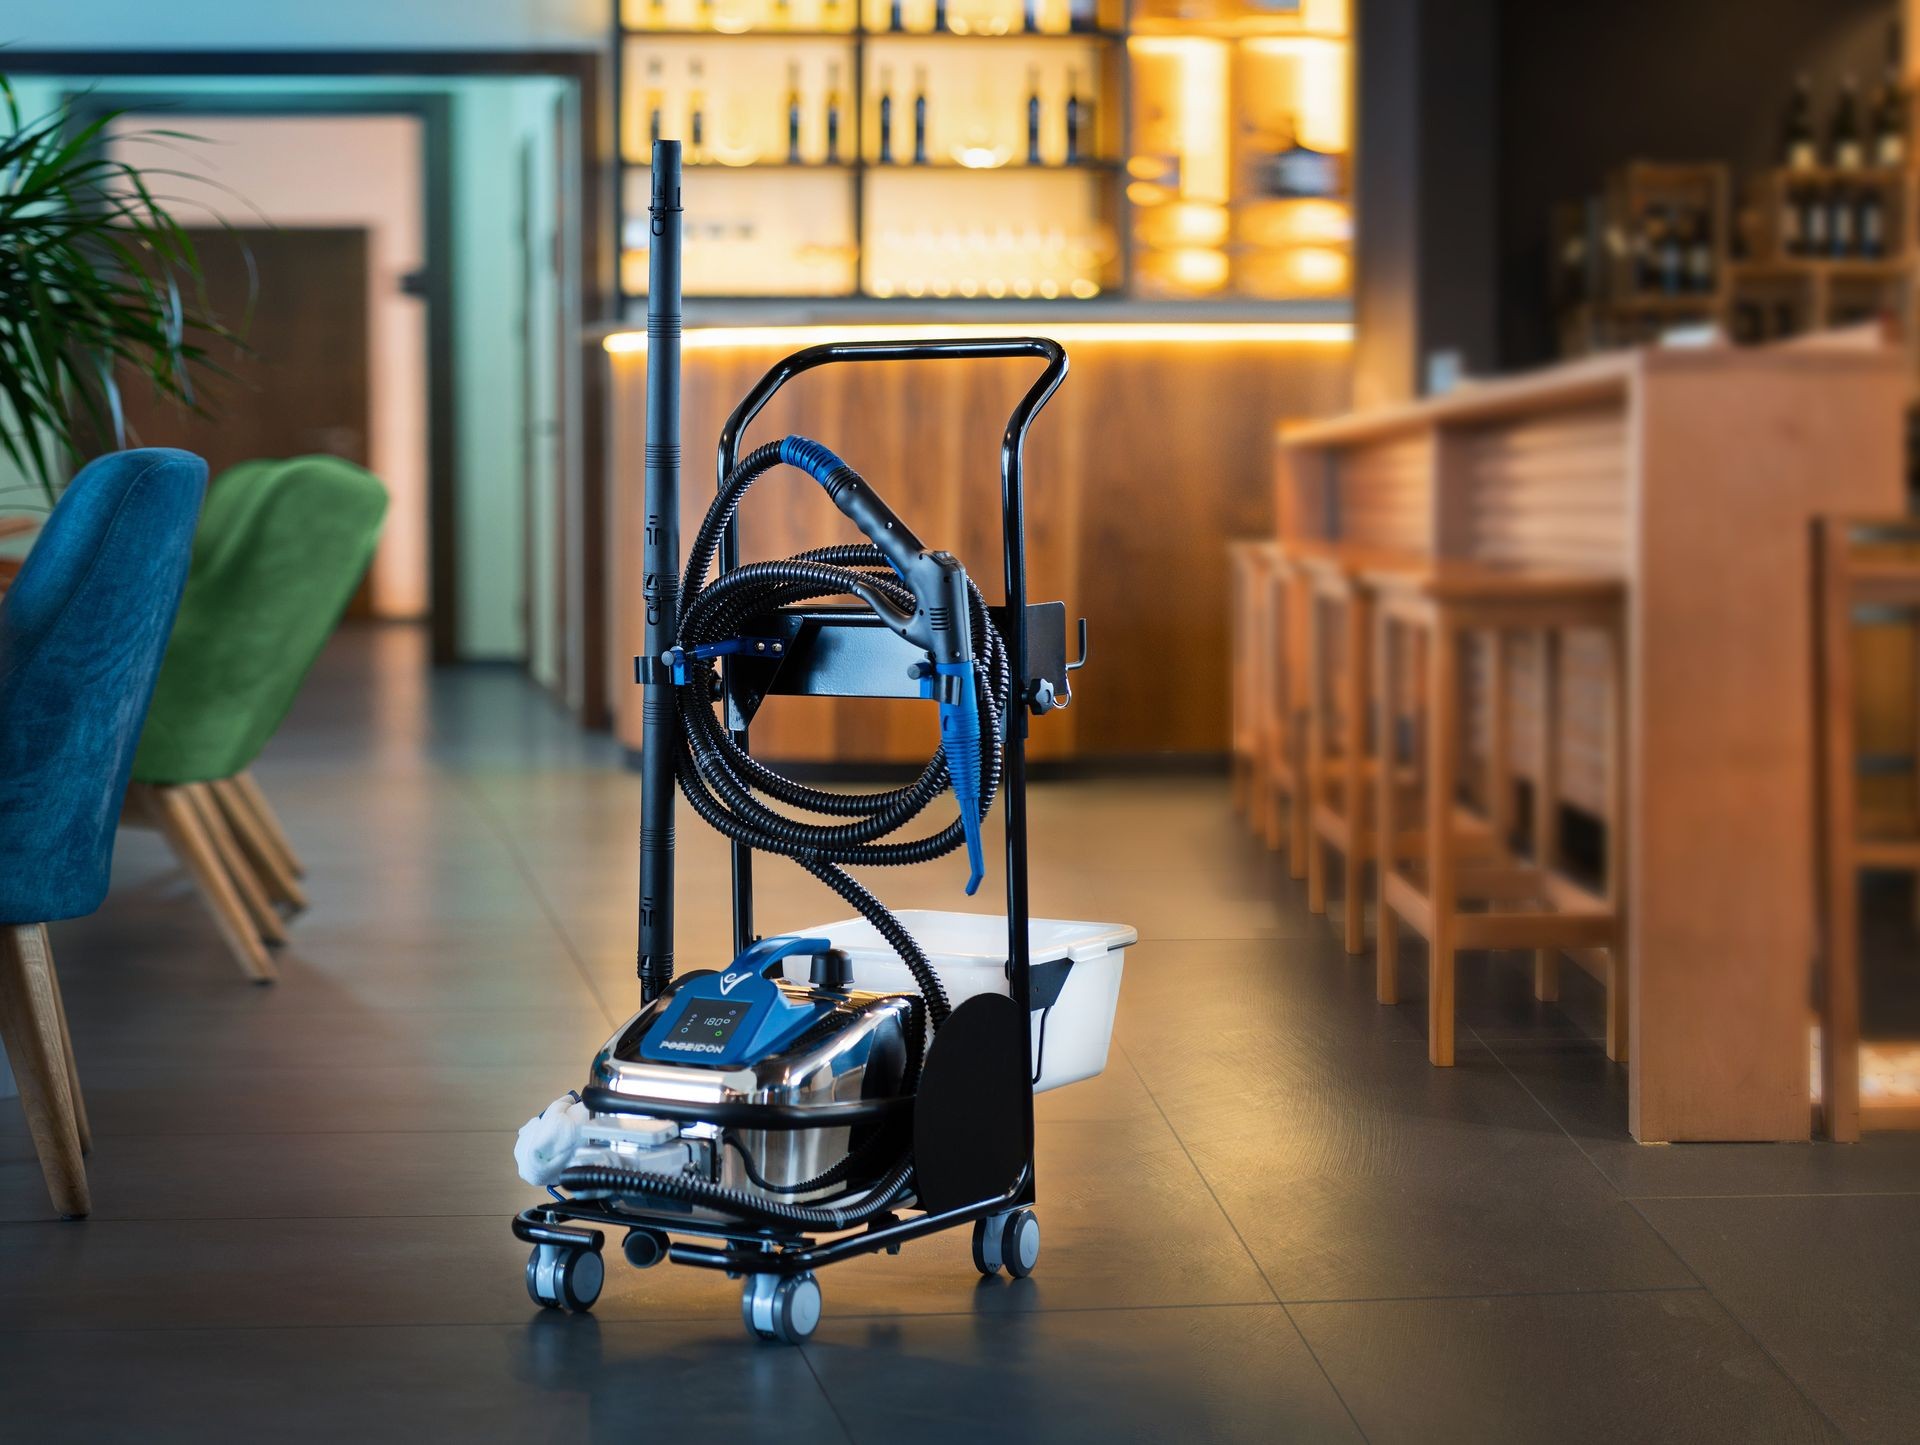 Steam cleaner on Cart